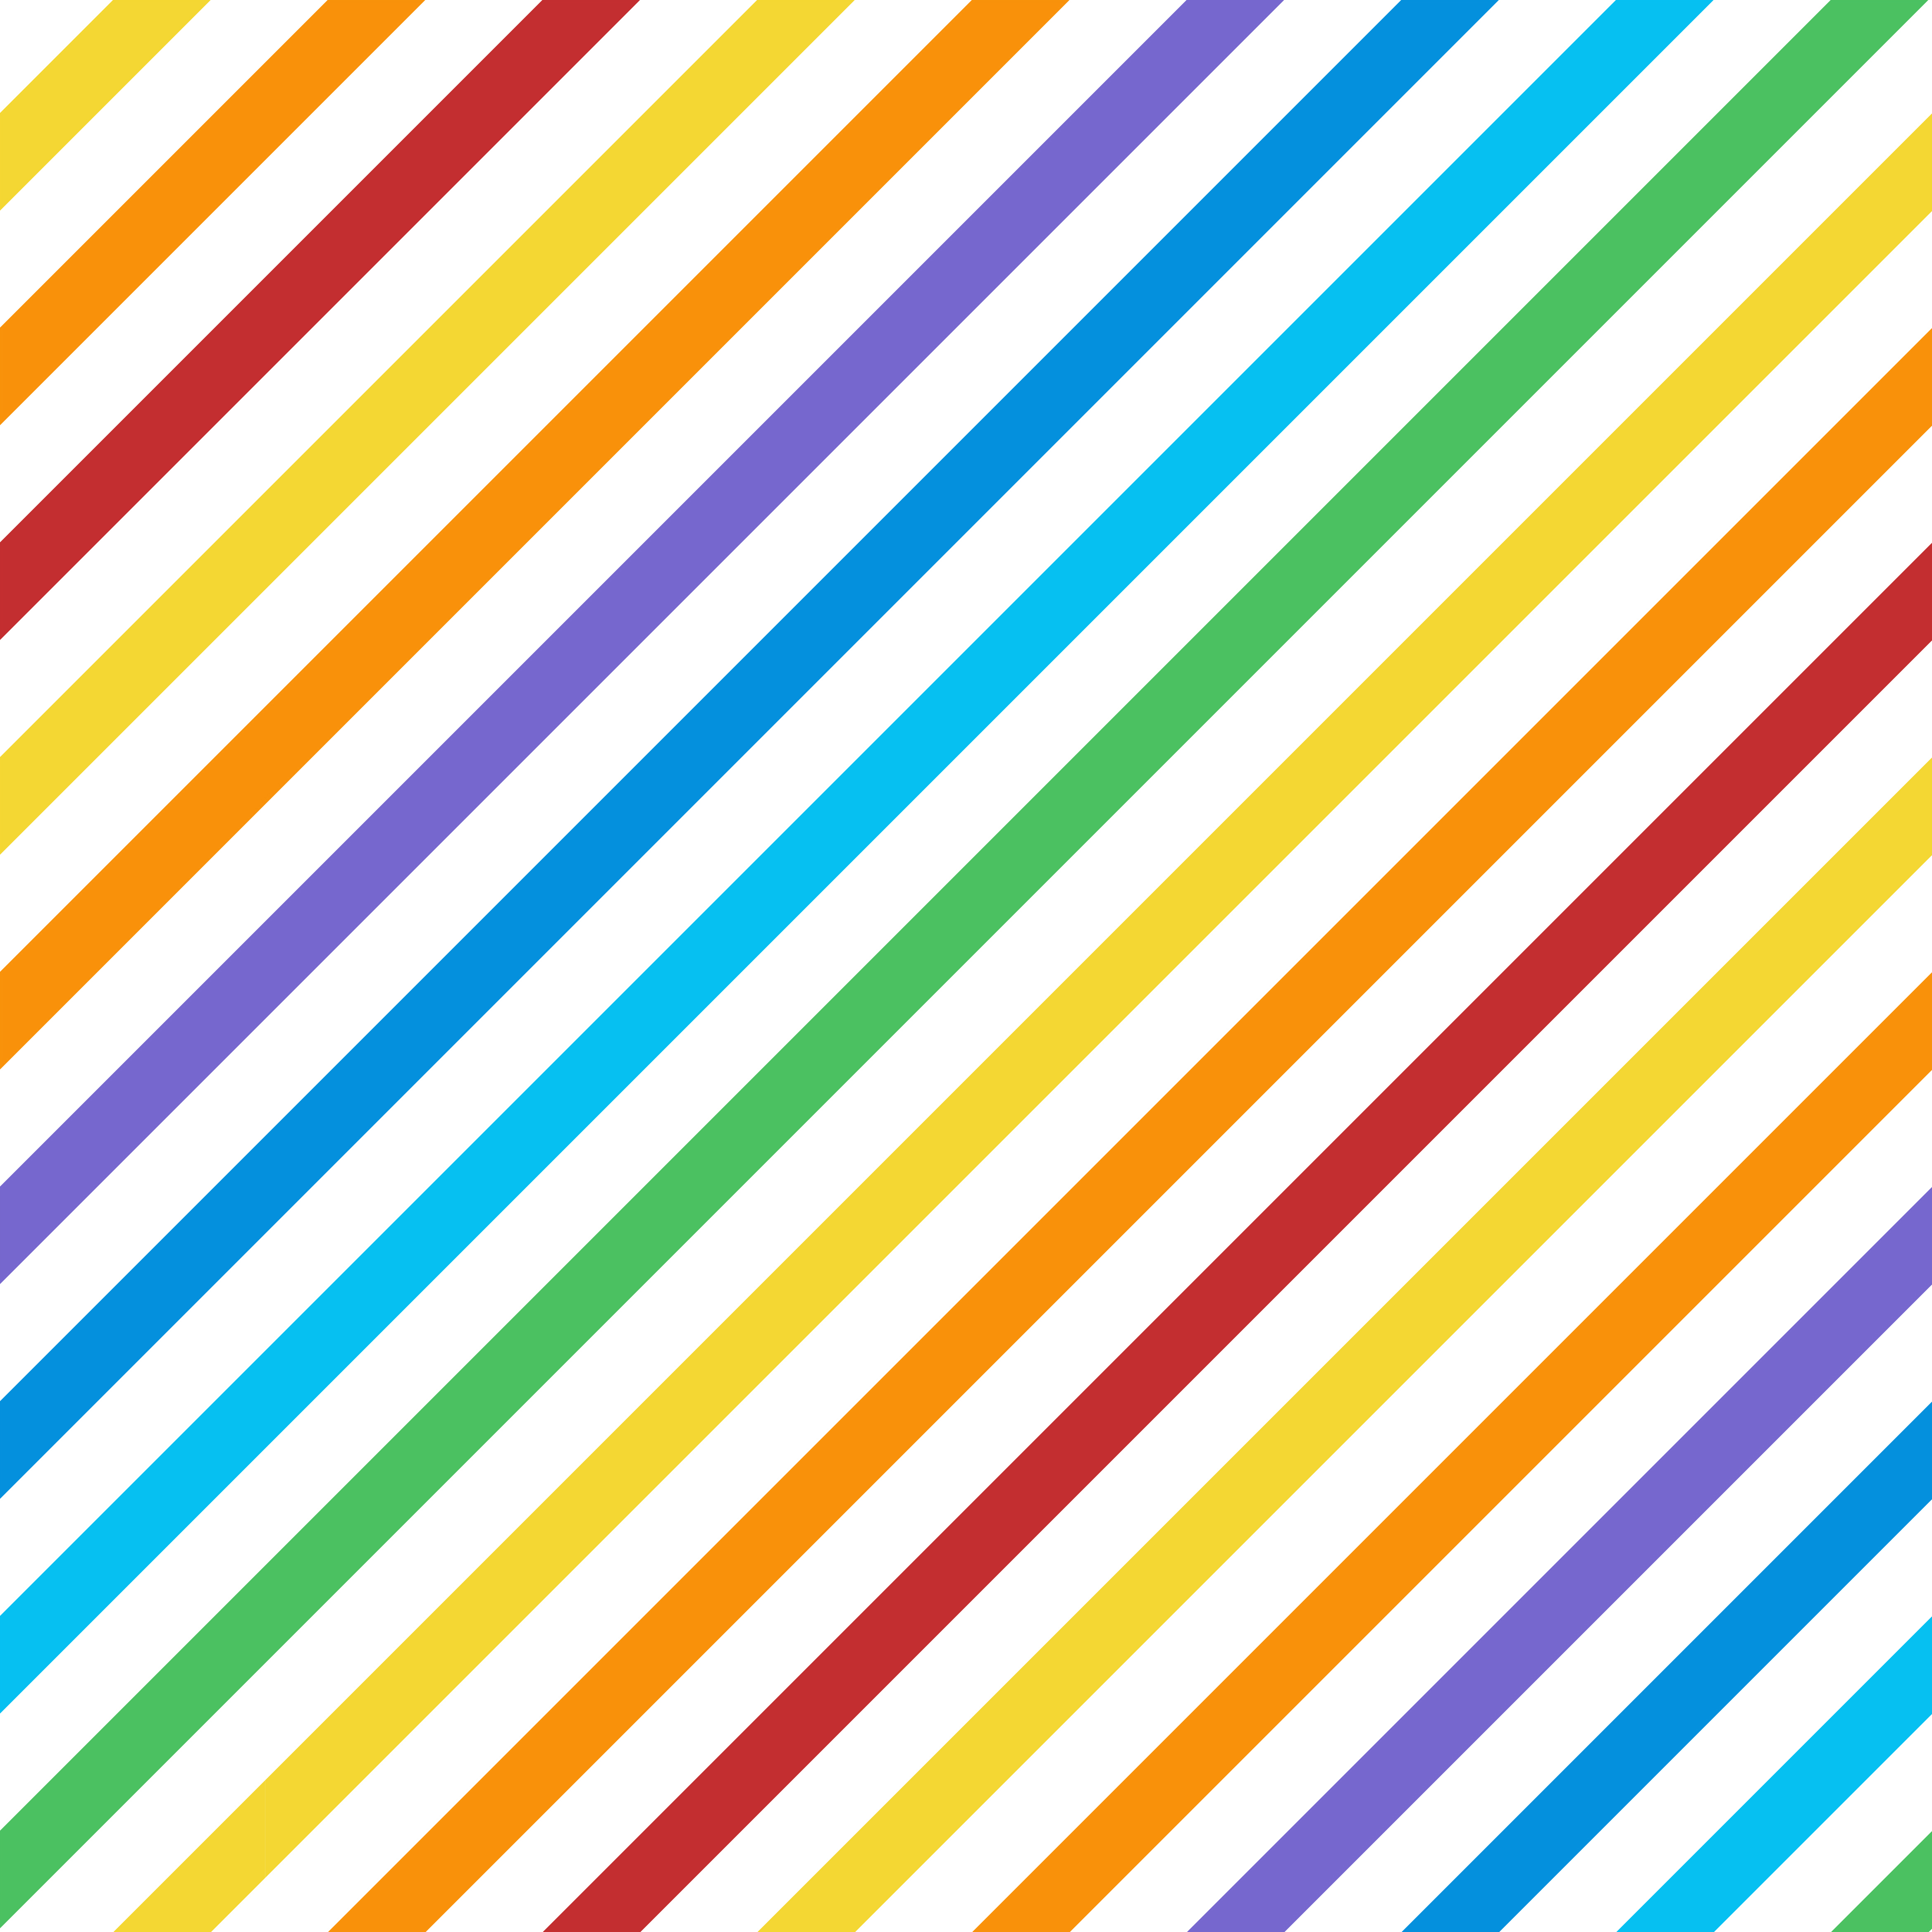 Seamless colorful diagonal stripes pattern vector Download Free